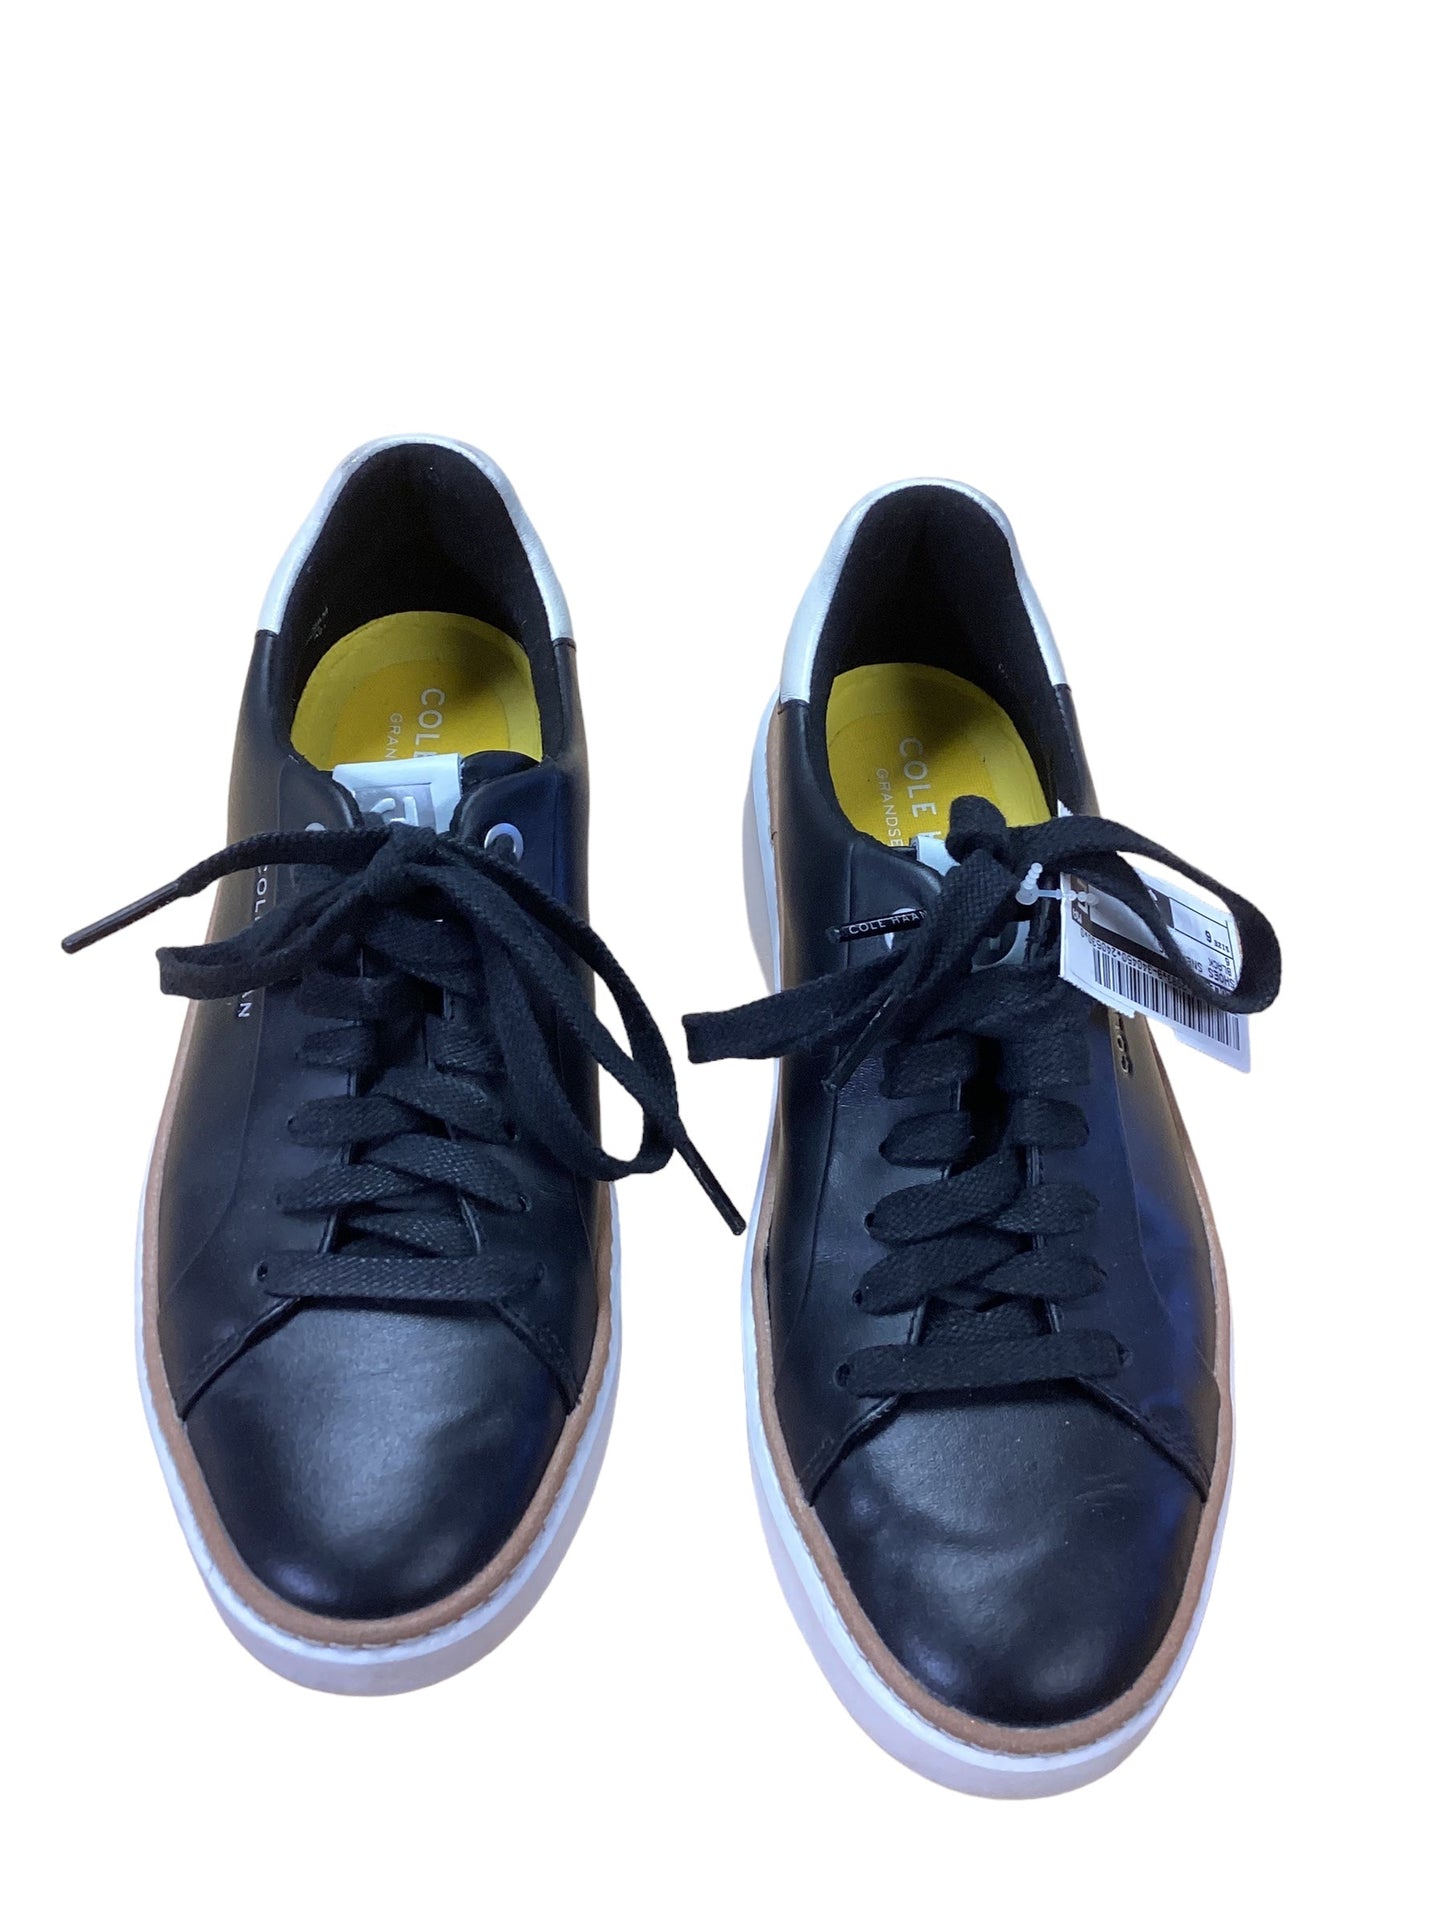 Black Shoes Sneakers Cole-haan, Size 6